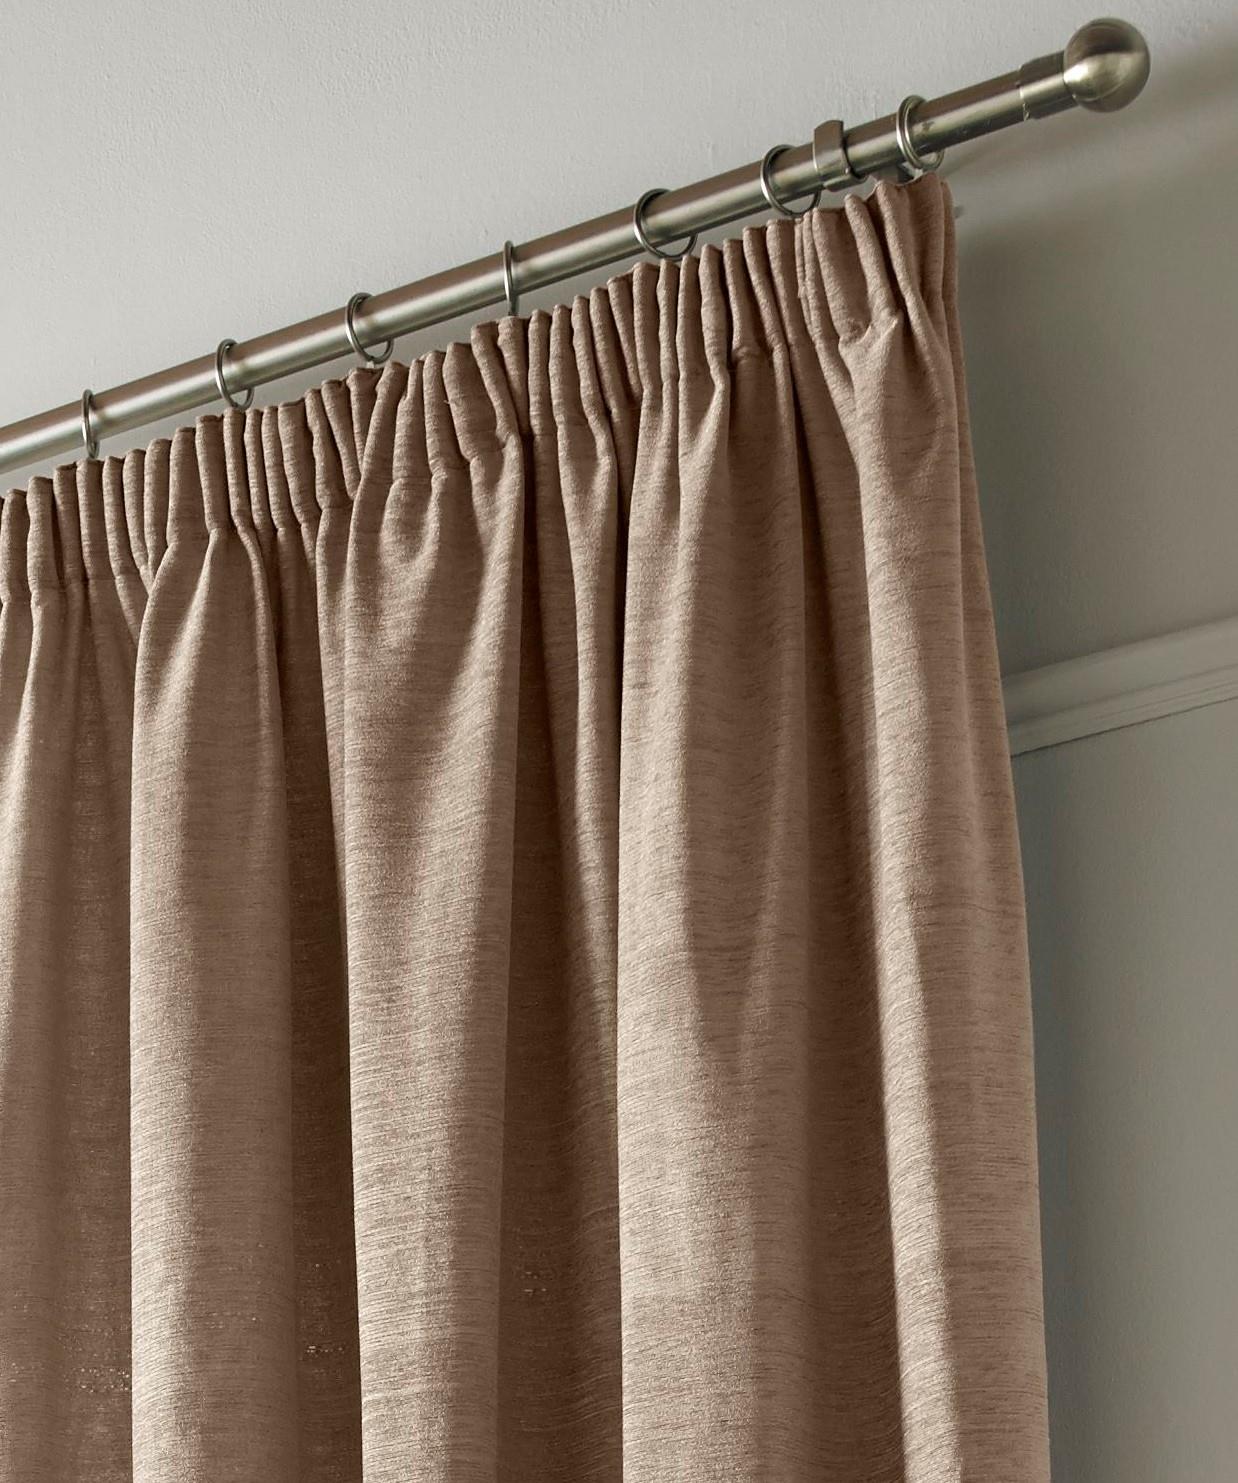 Latte Plain Chenille Fully Lined Pencil Pleat Curtains Pair